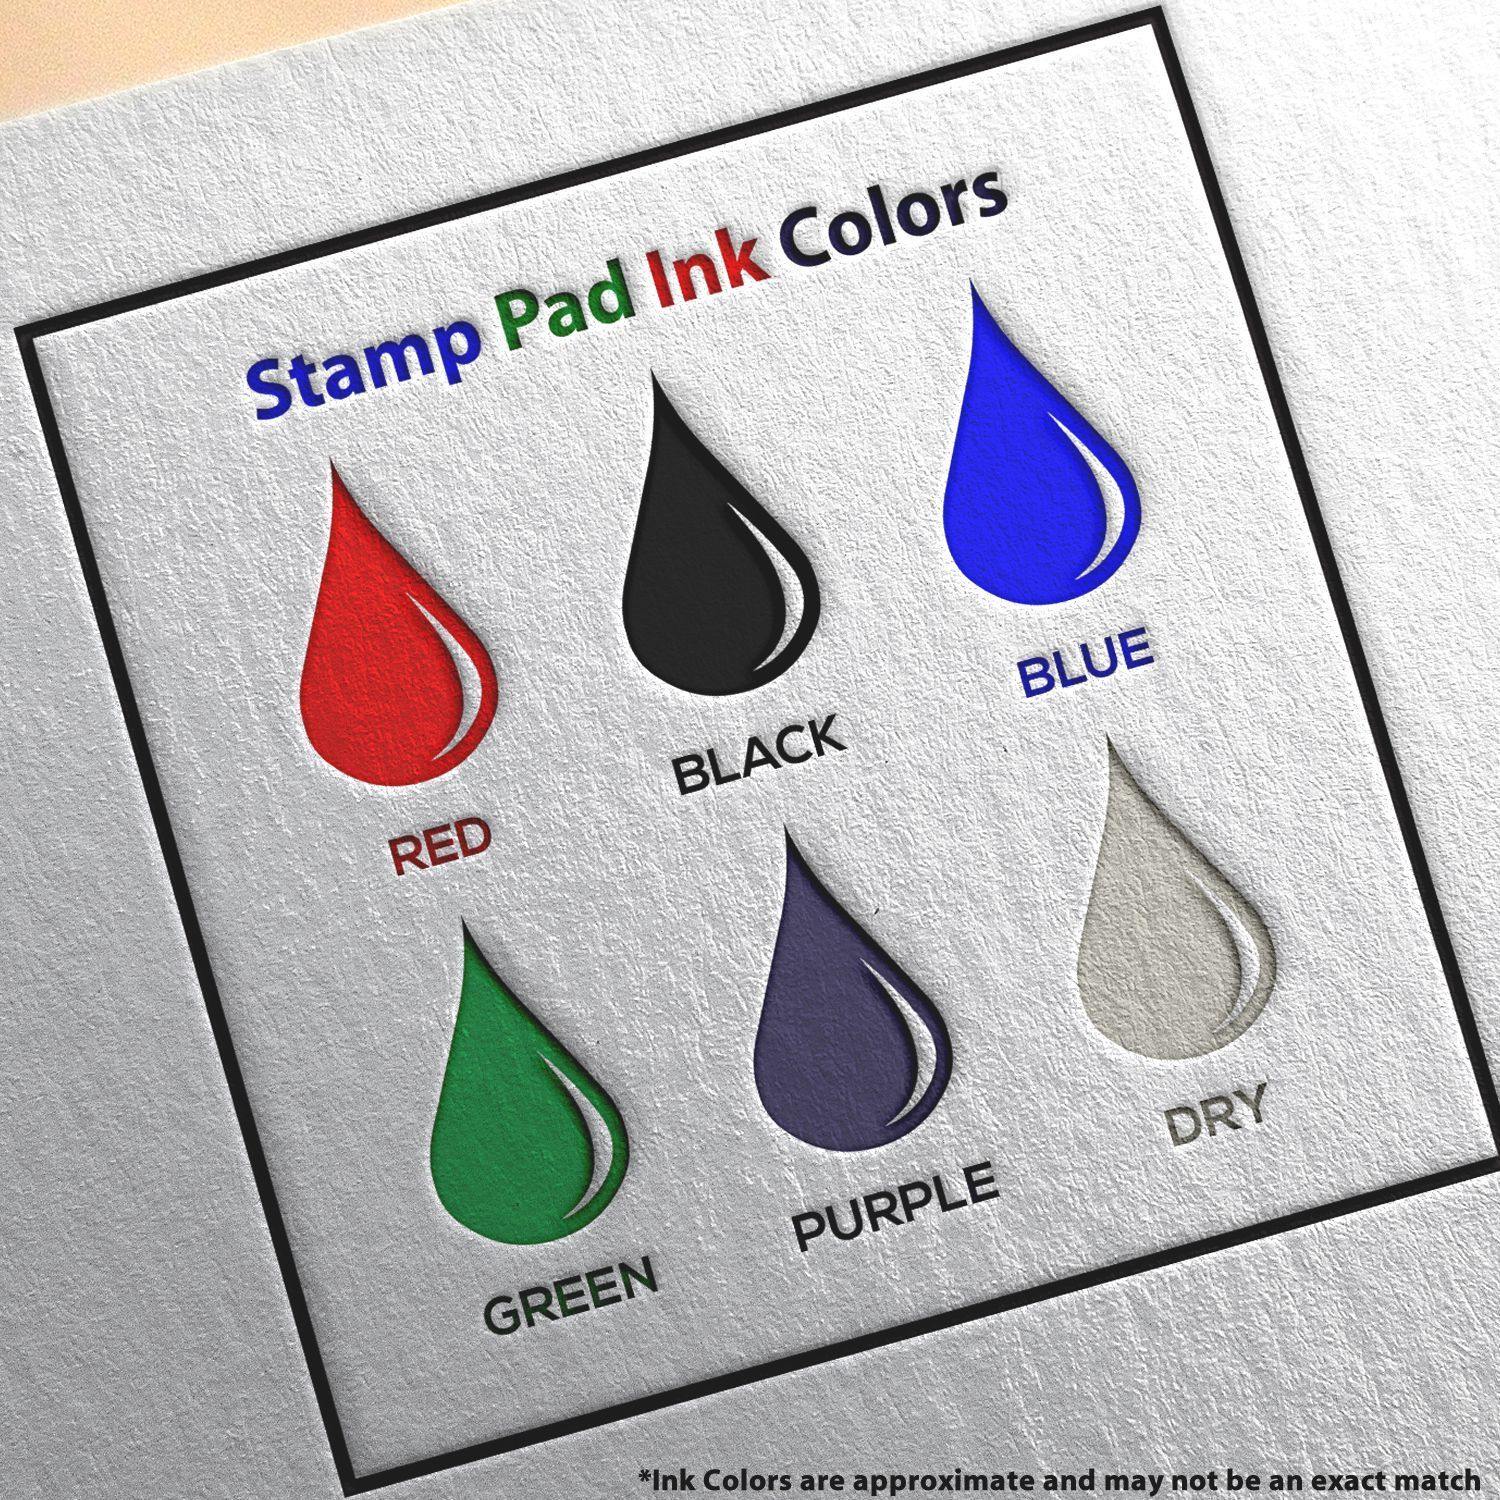 Ink Pad for Rubber Stamp, Ink Pad Black, Ink Pad Blue, Ink Pad Red